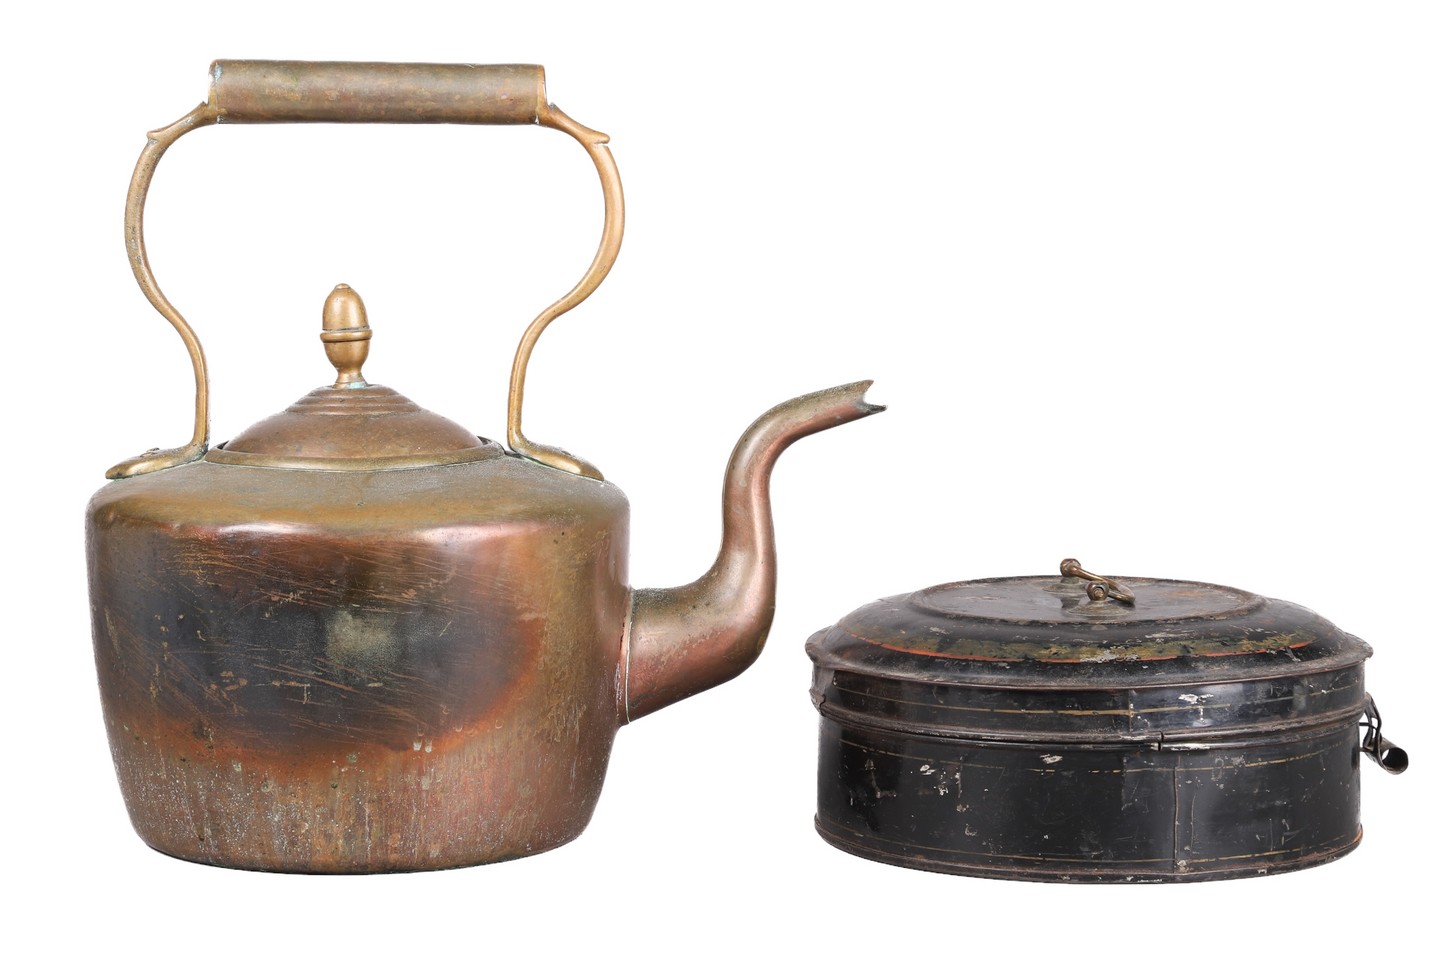 Tole painted spice box and kettle to